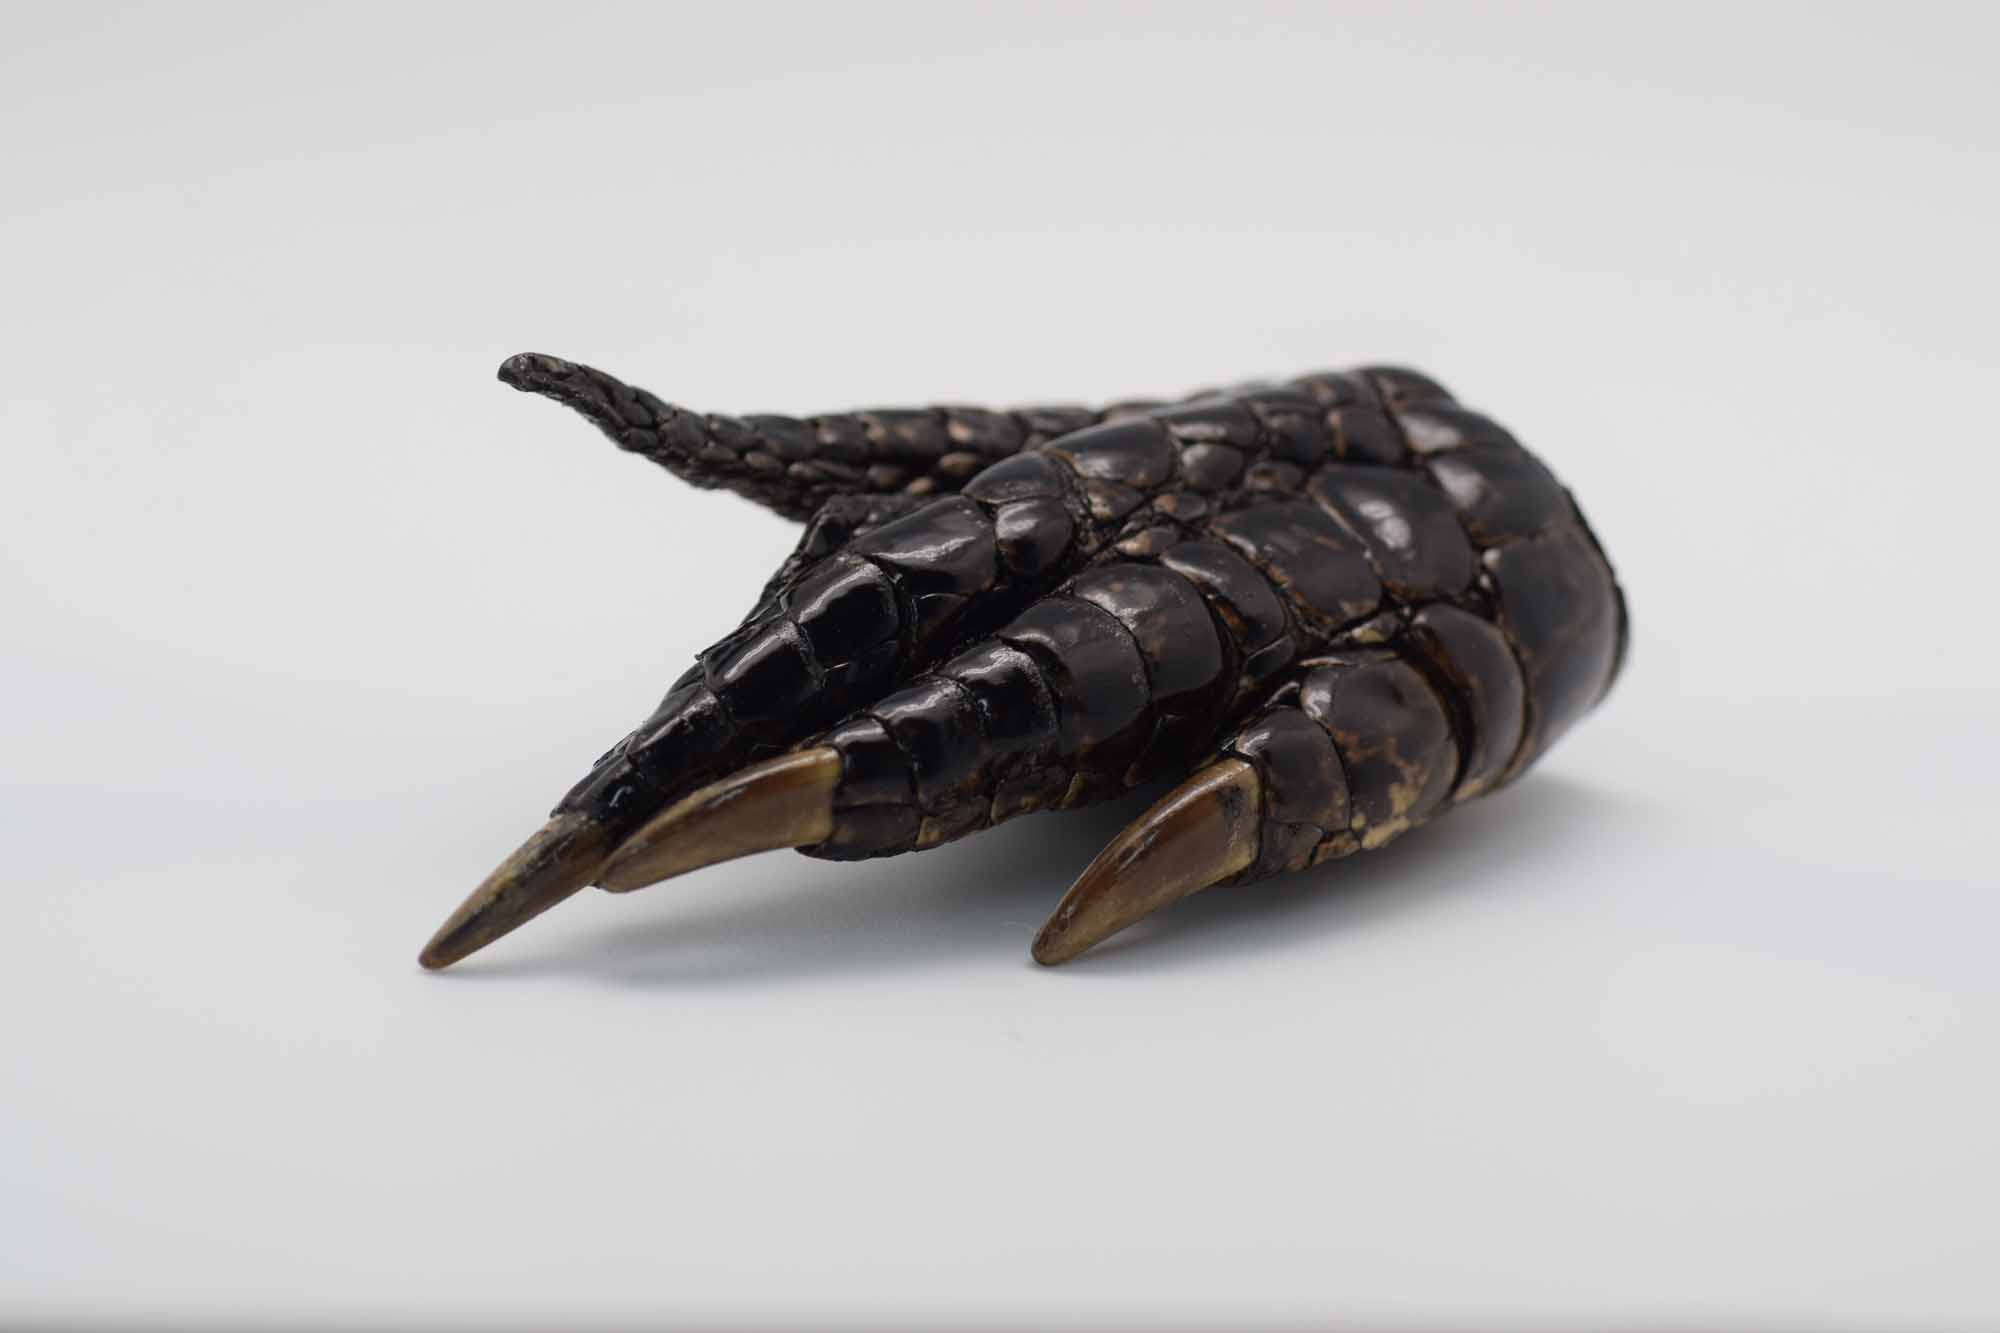 Alligator Foot: Extra Large: 5" to 7" - 21-AG-J1 (M1)